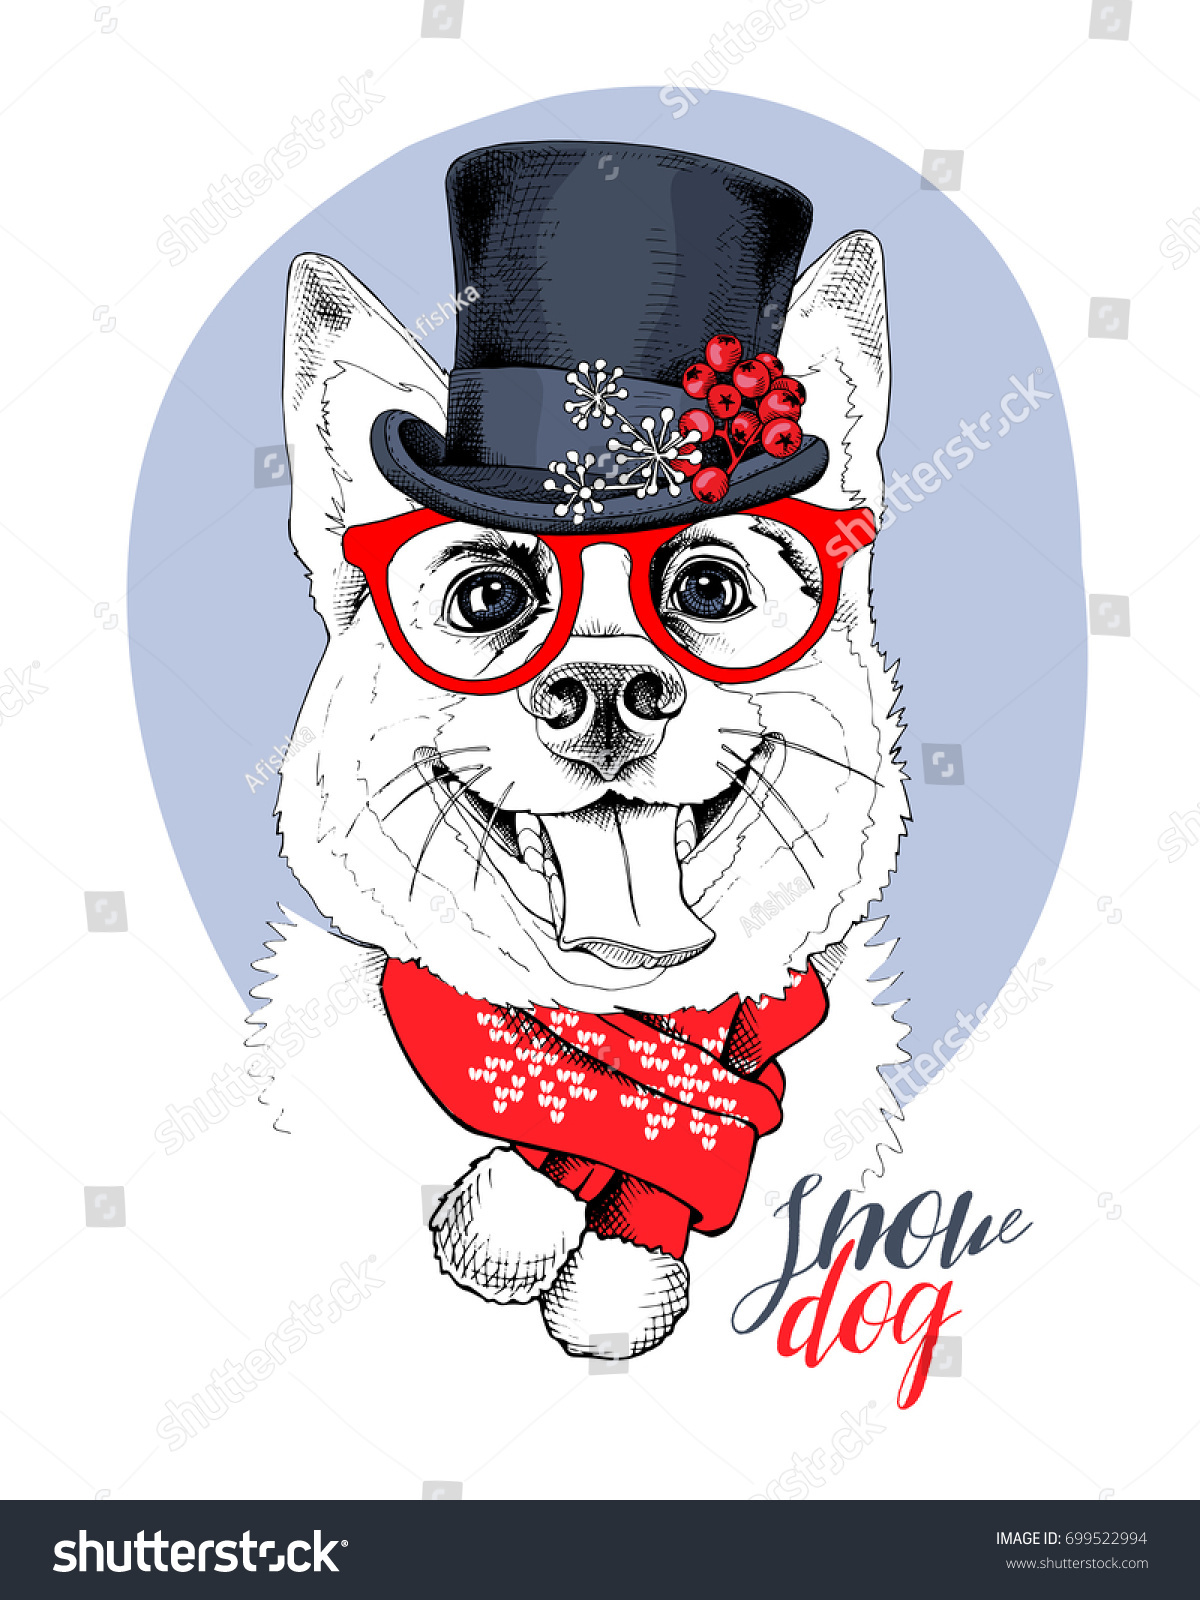 Christmas card Portrait of the Smiling dog in a Snowman top hat and in a